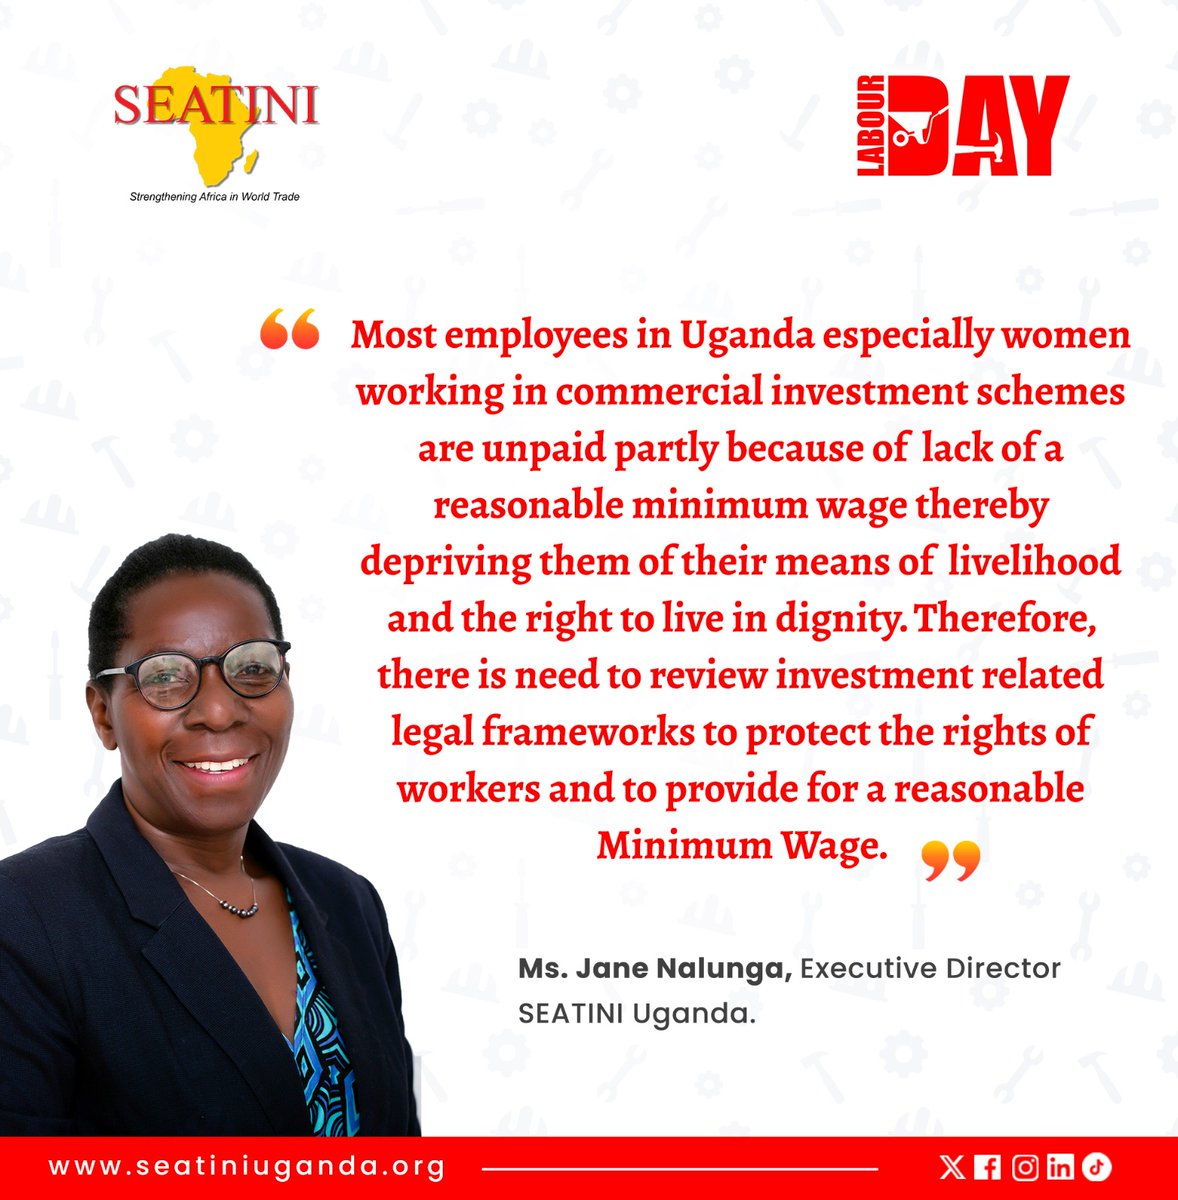 #LabourDay2024 
Ms. Jane Nalunga, ExecutiveDirector, SEATINI Uganda:
Most employees in Uganda especially women working in commercial investment schemes are unpaid partly because of lack of a reasonable minimum wage thereby depriving them of their means of livelihood....